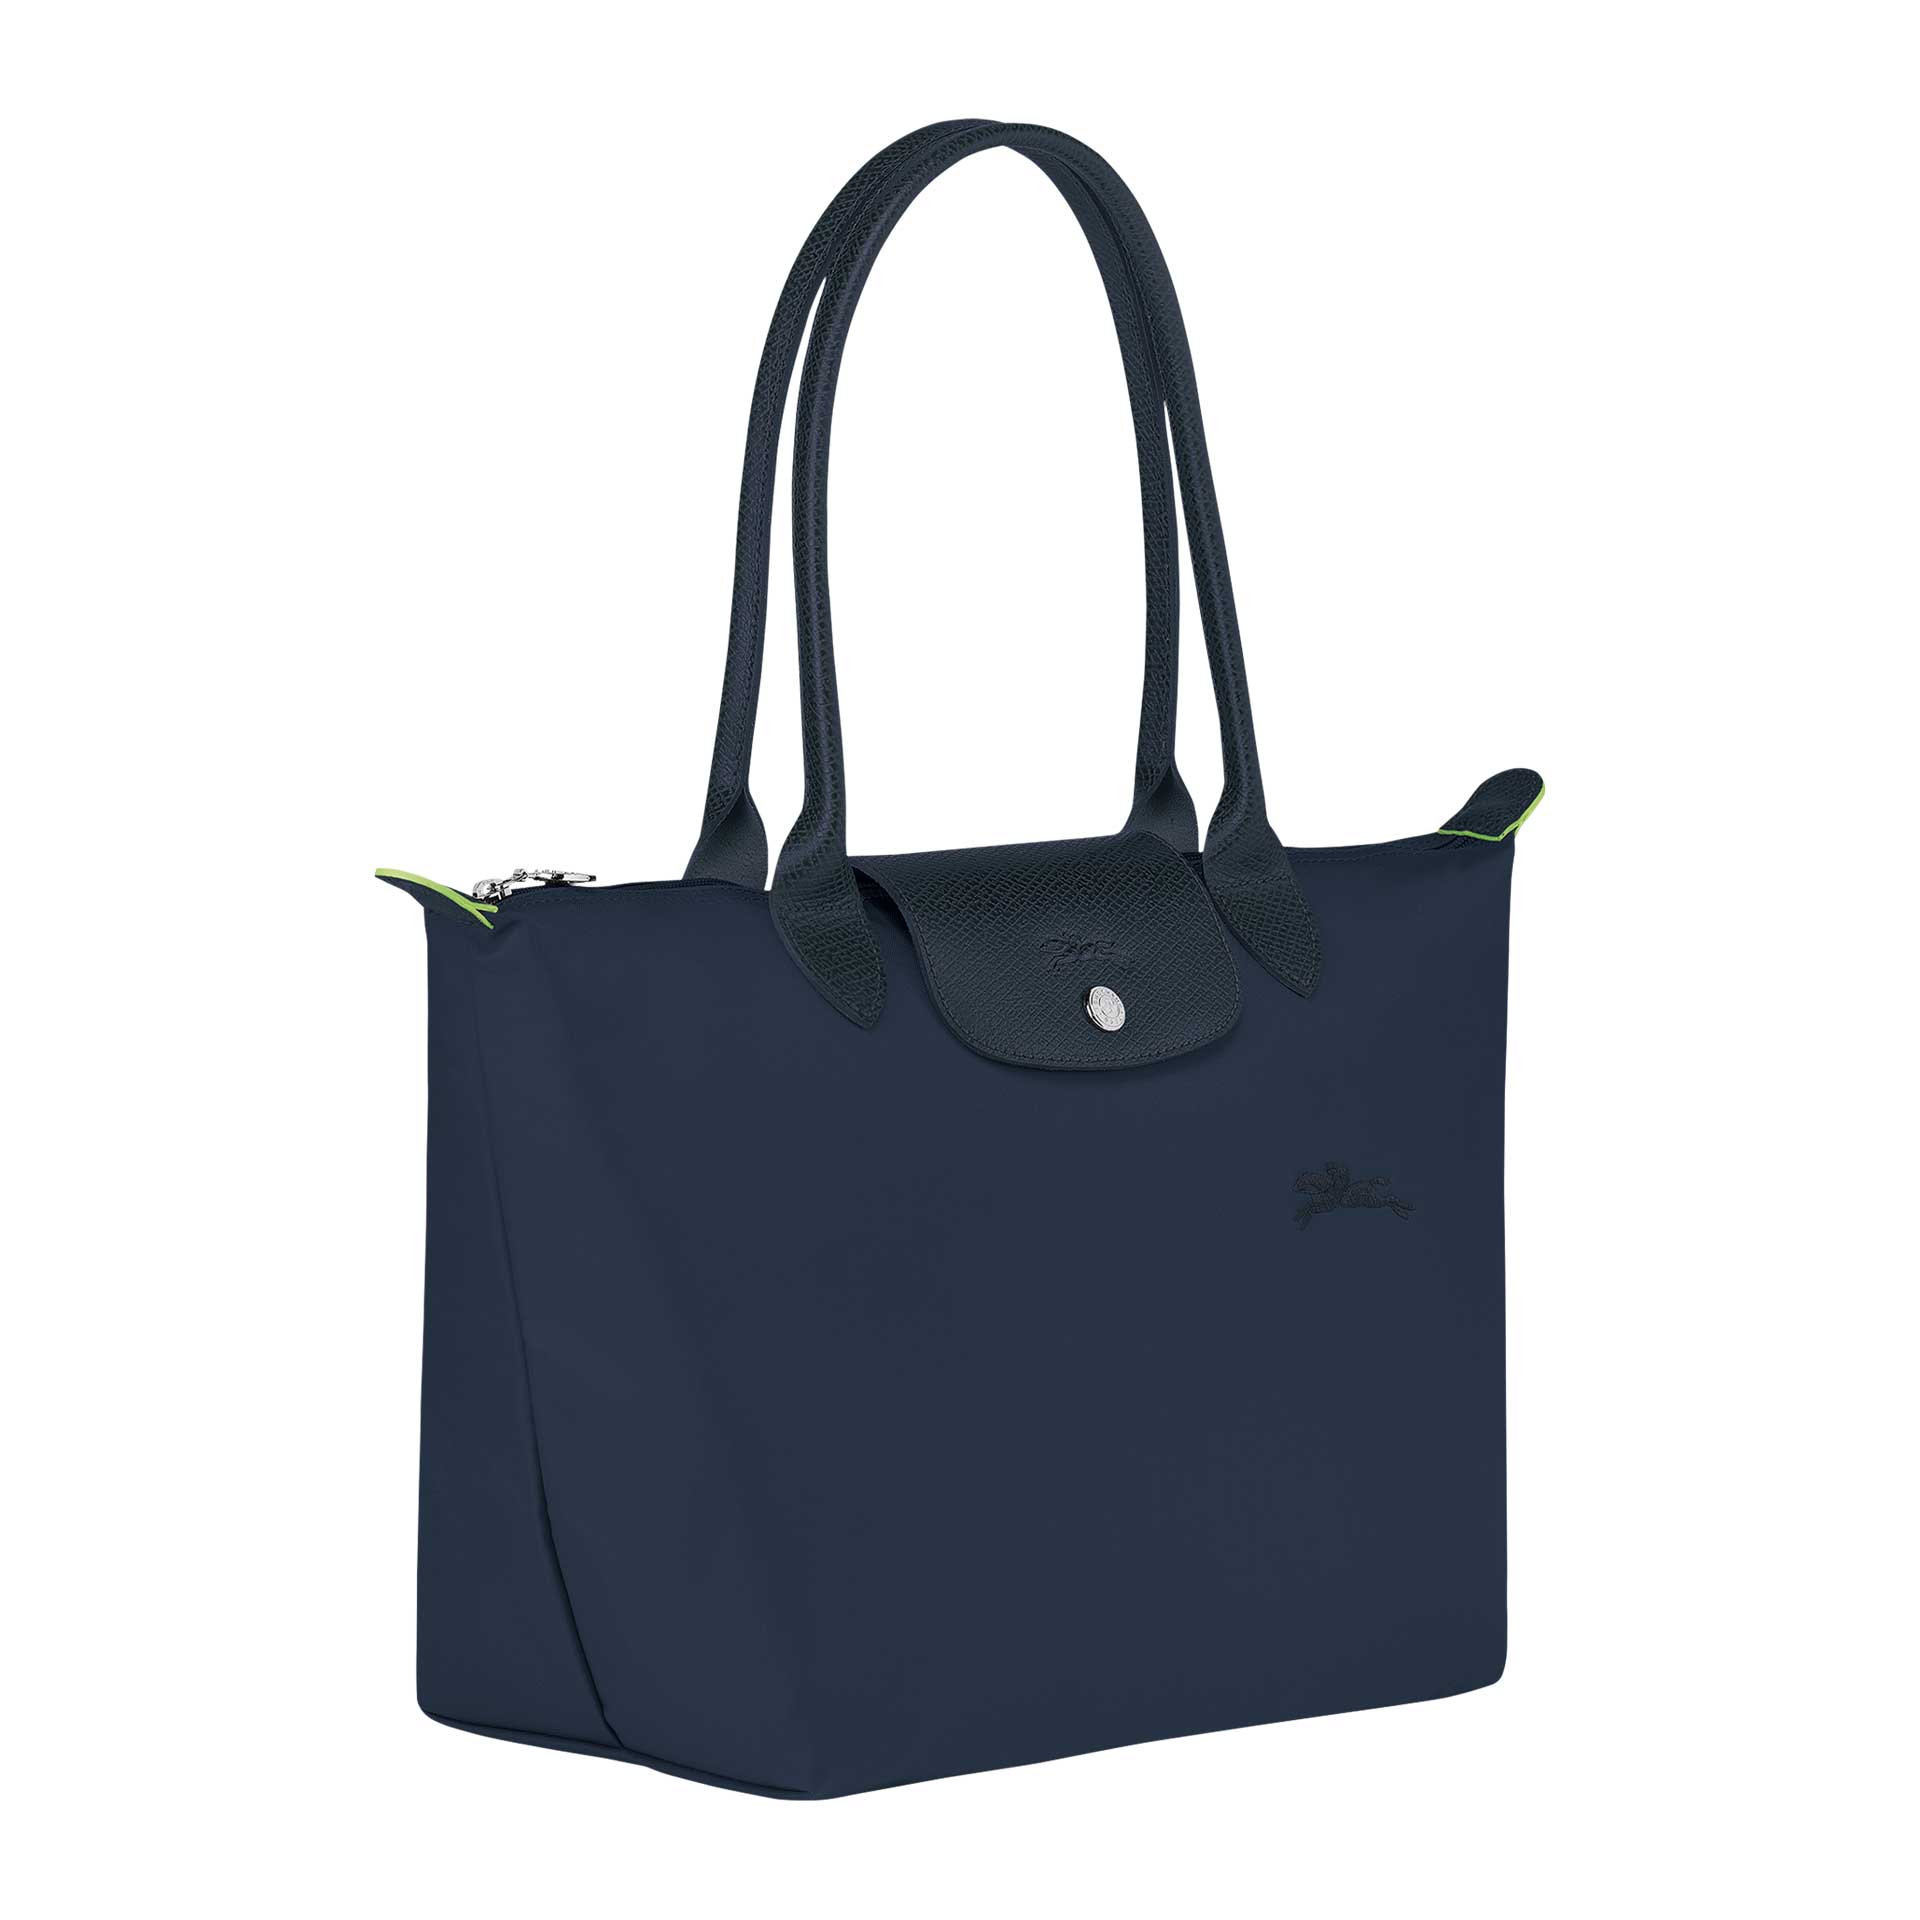 Longchamp Le Pliage Green Schultertasche aus Recycling Material S navy